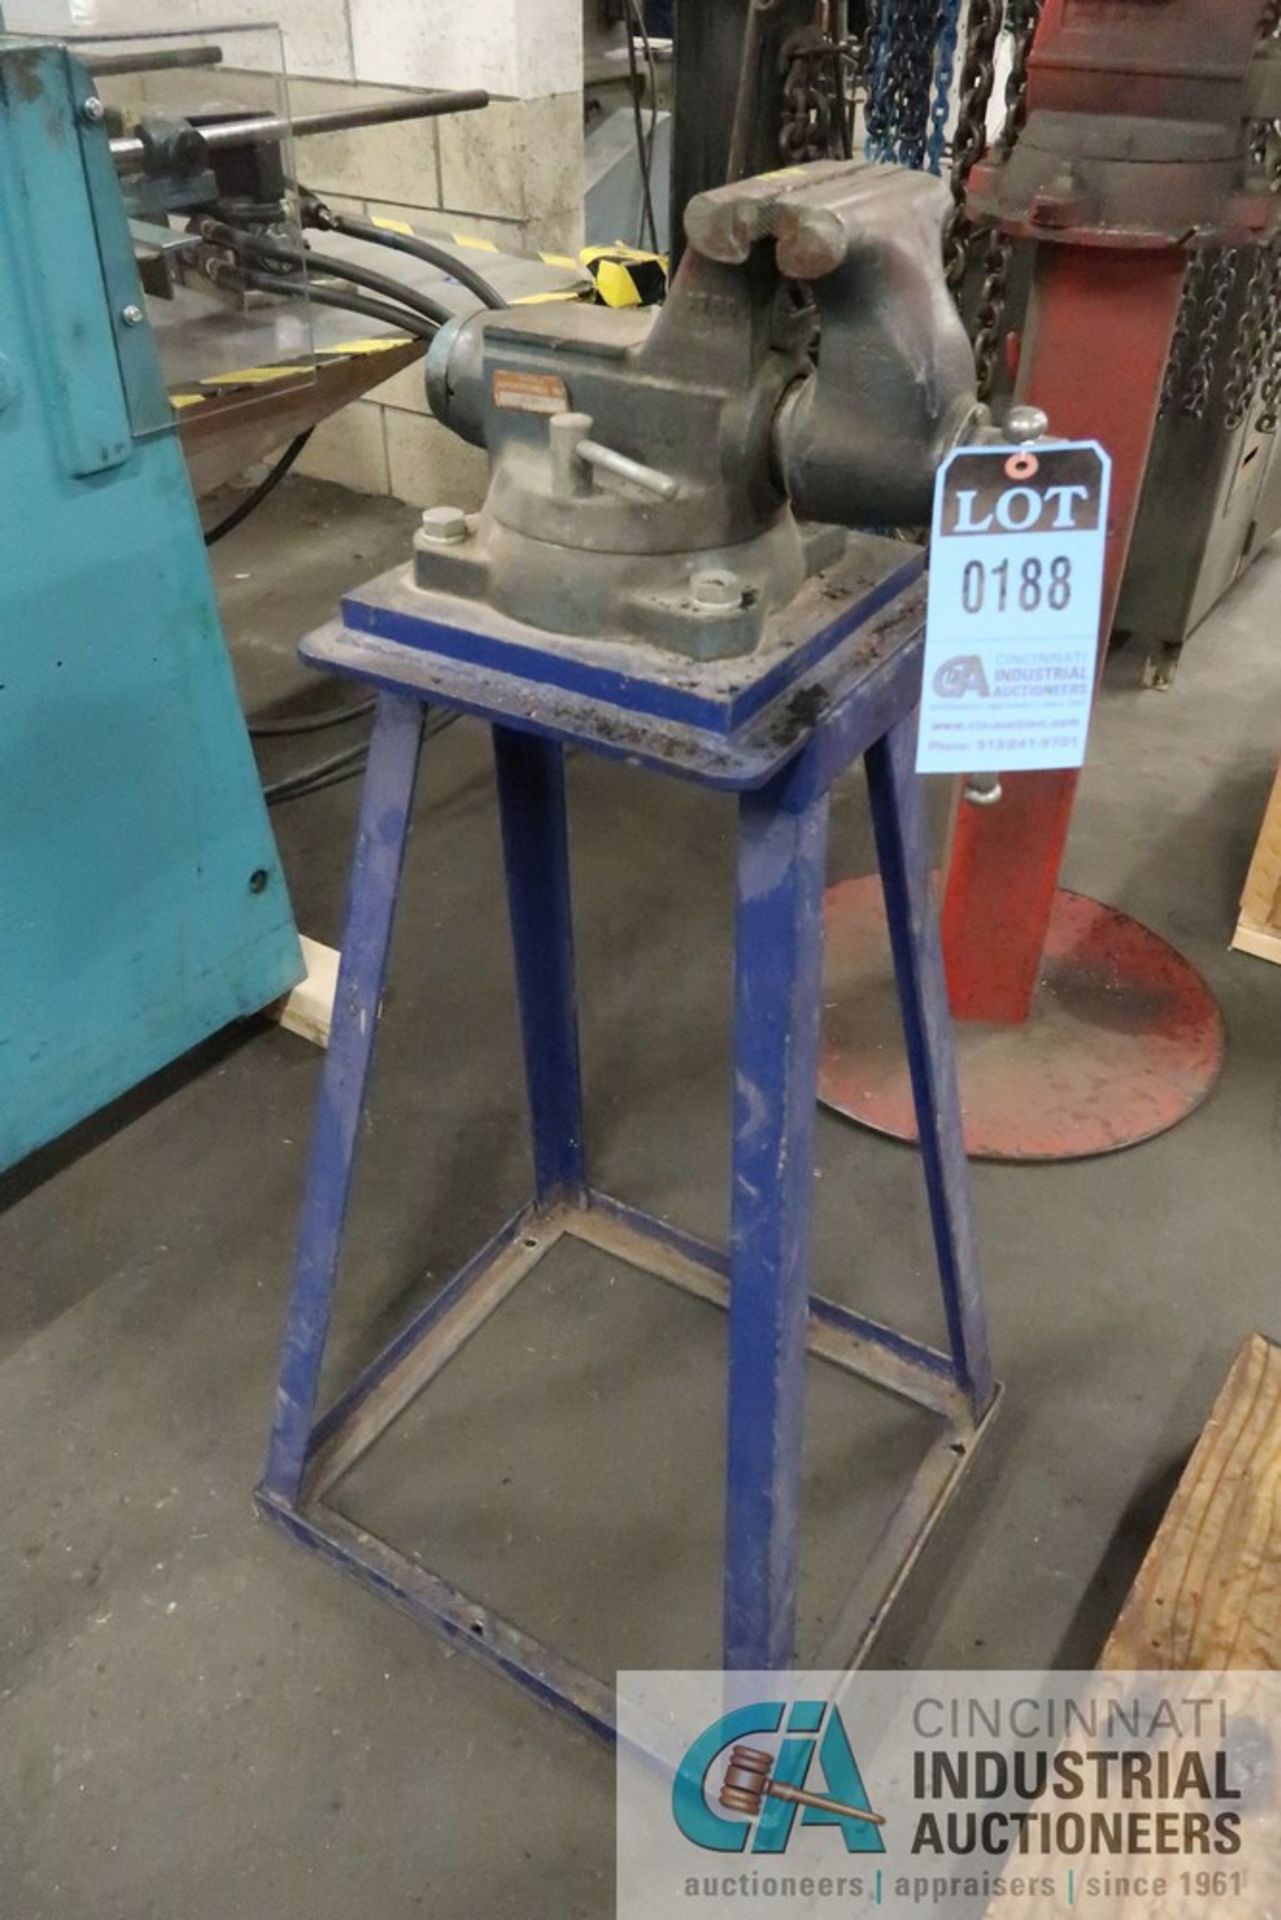 5" BENCH VISE MOUNTED ON STEEL STAND